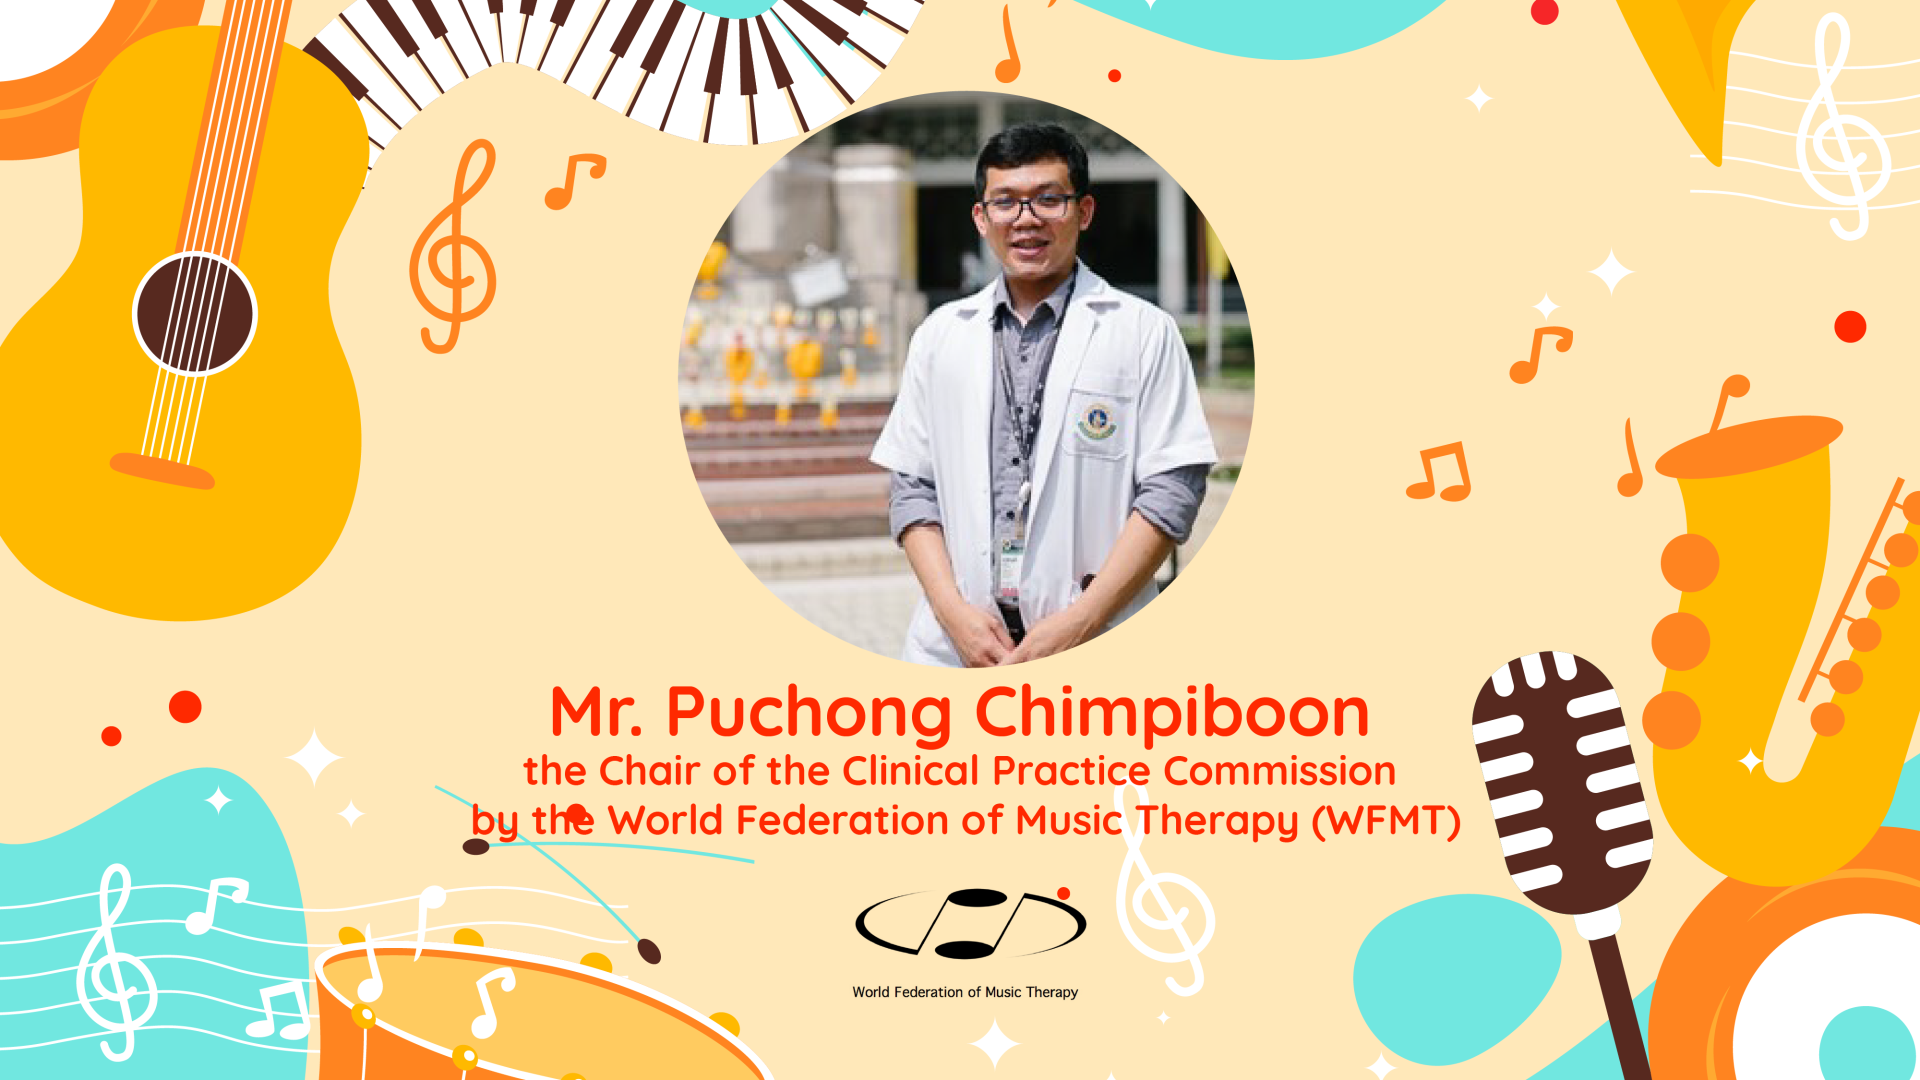 The World Federation of Music Therapy Appointed Siriraj As a Chair of the Clinical Practice Commission